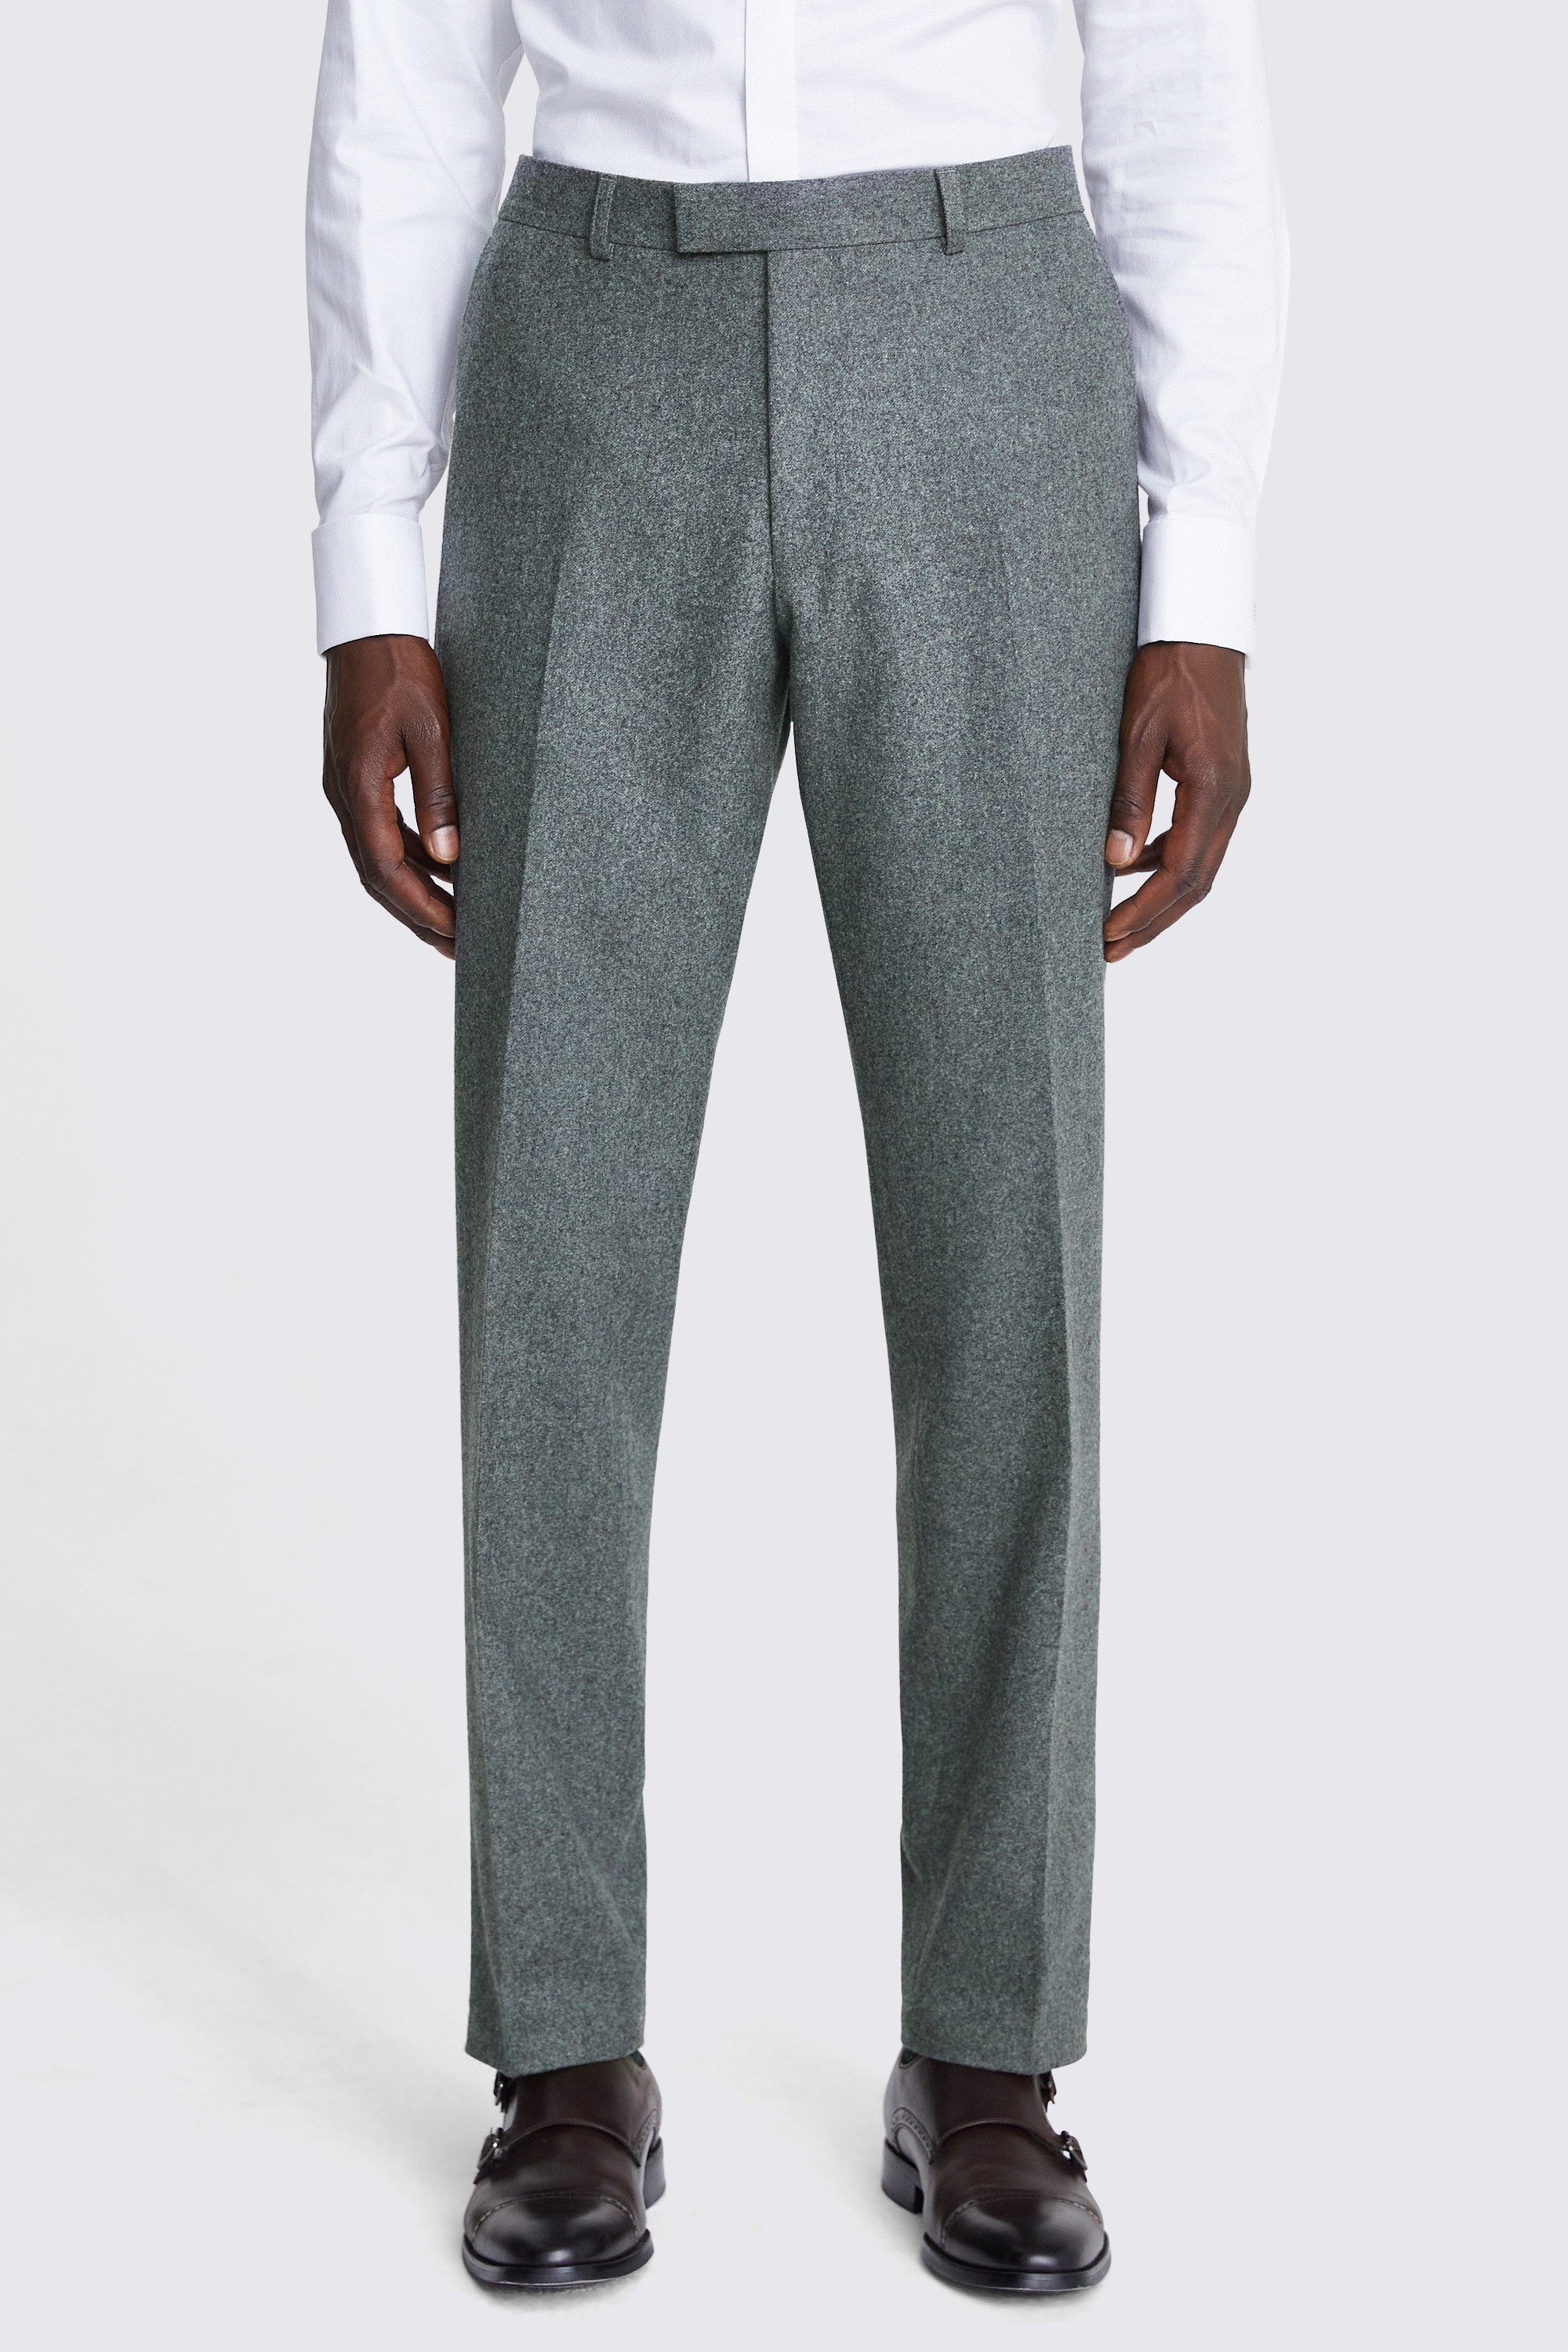 Italian Tailored Fit Sage Flannel Trousers | Buy Online at Moss